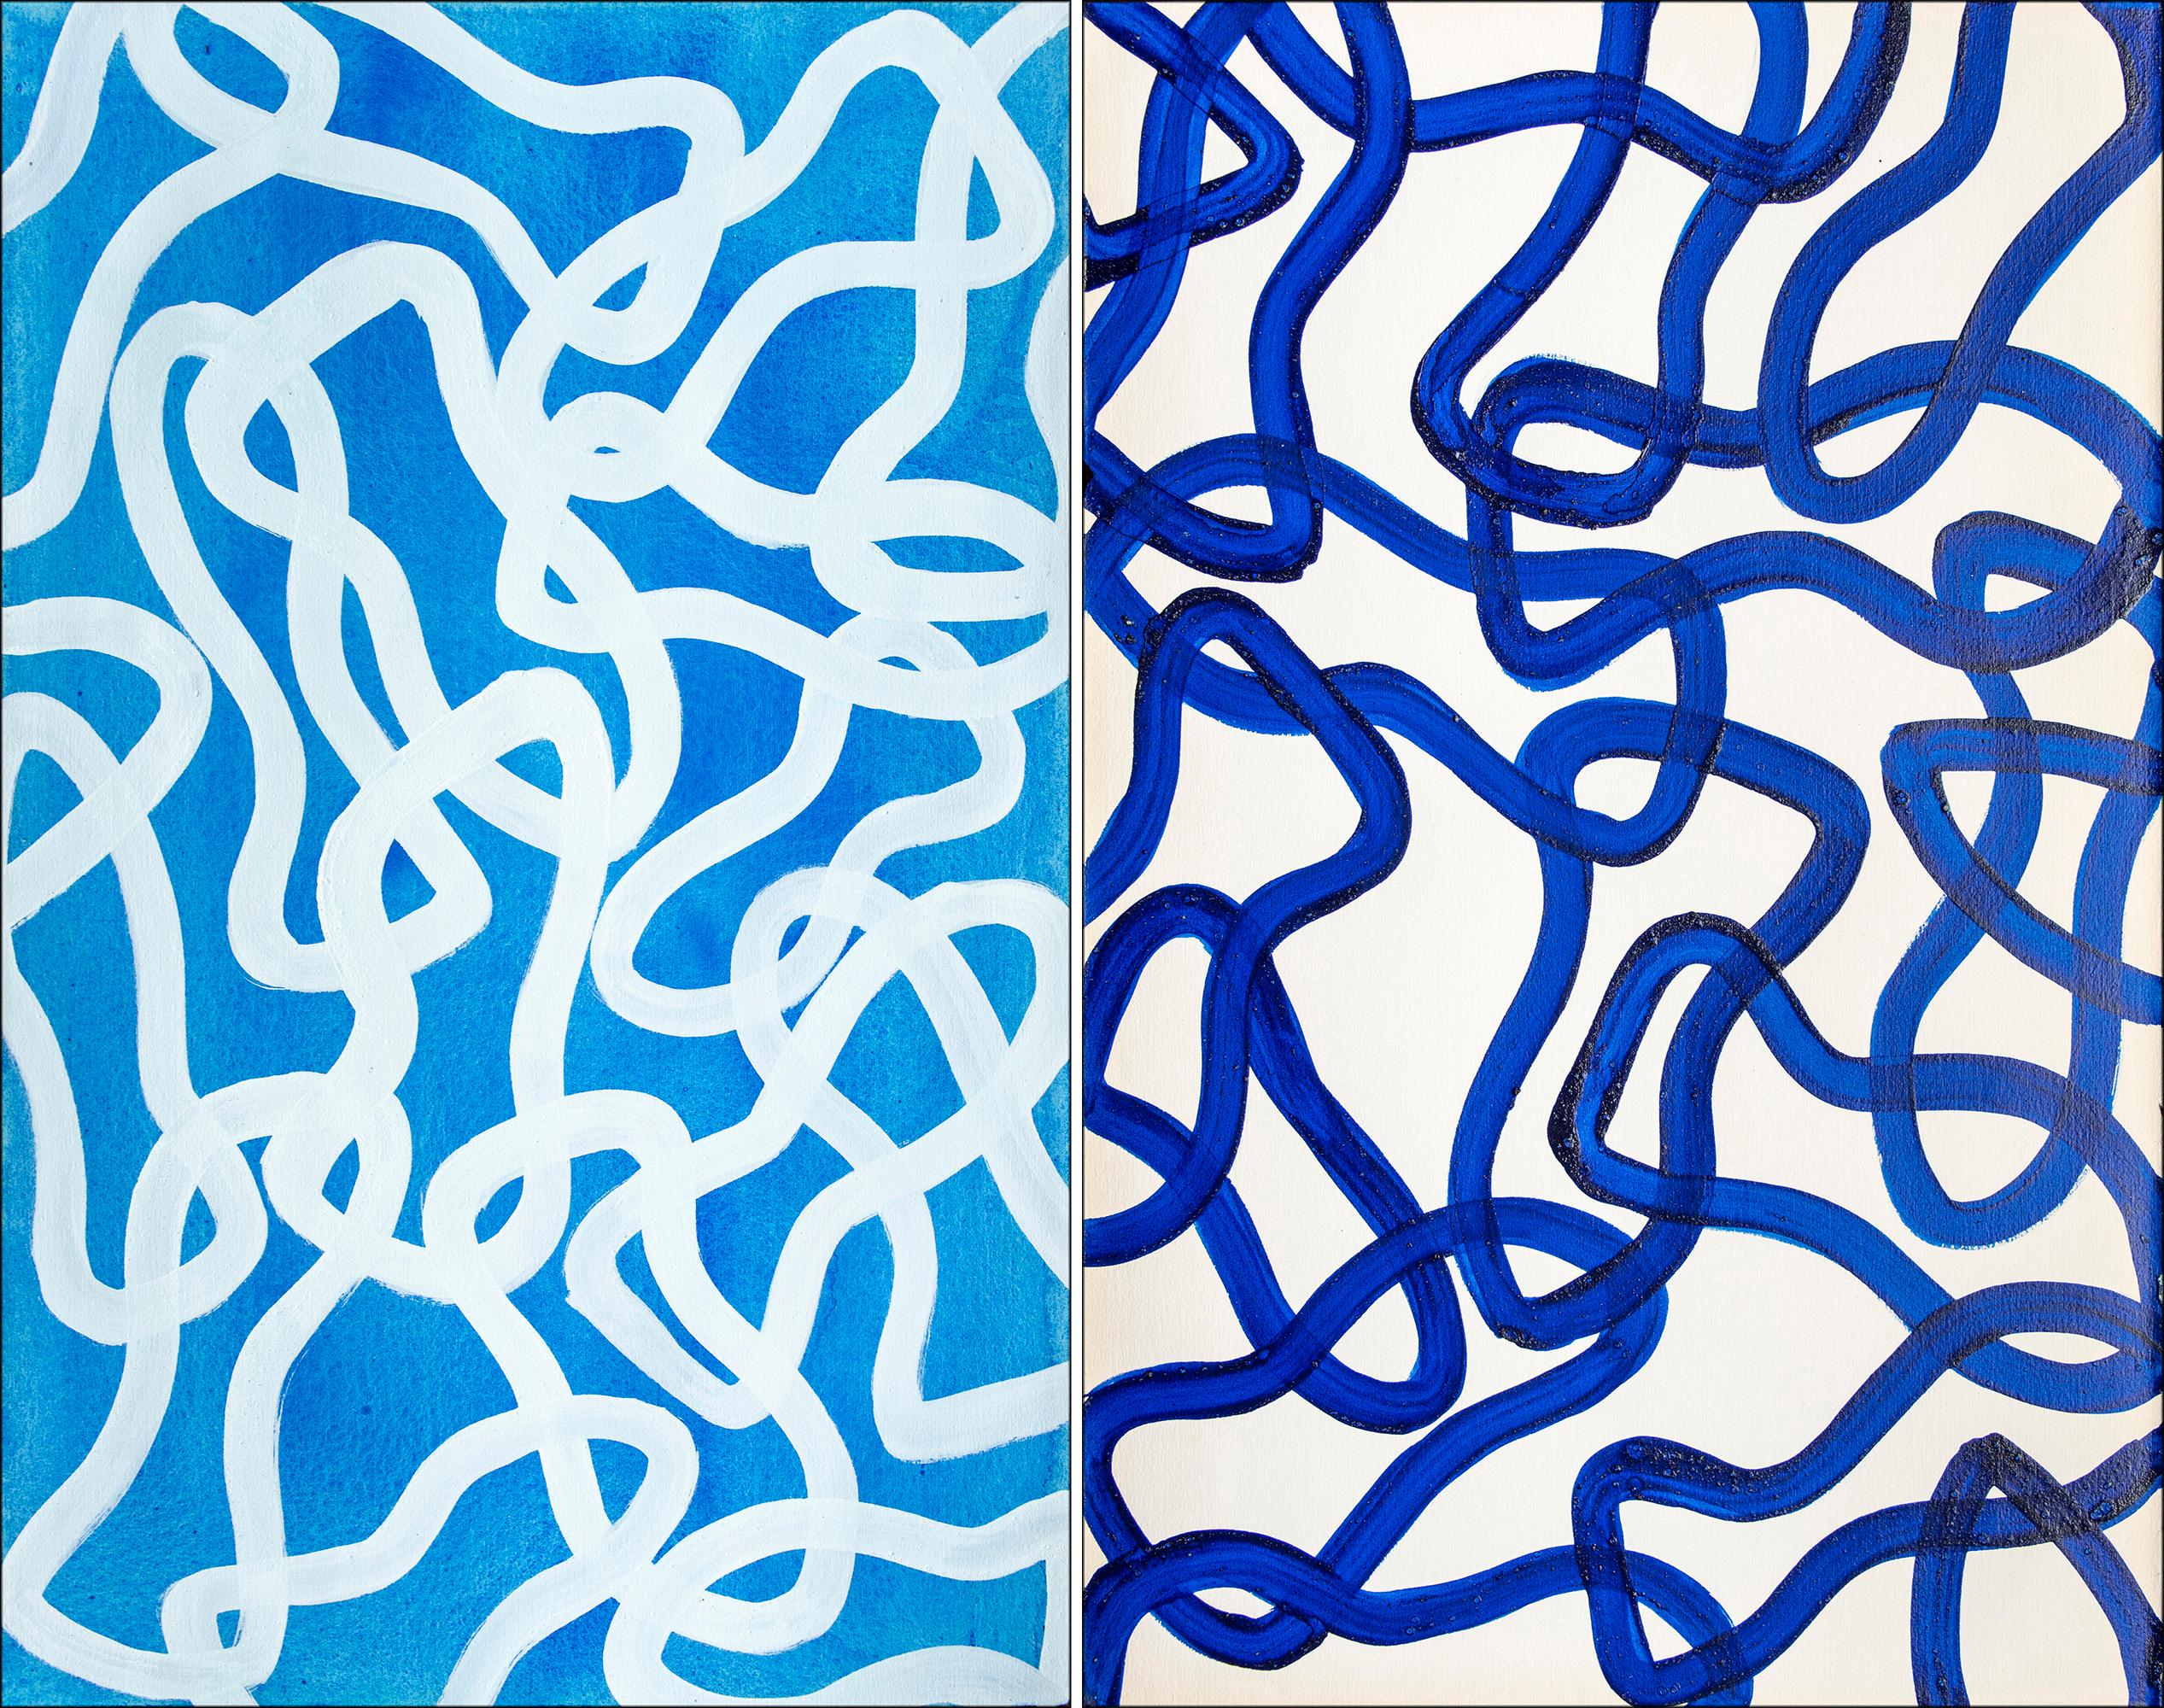 Enric Servera Abstract Painting - Blue and White Diptych, Overlapping Abstract Fish Gestures, Mediterranean, Salty